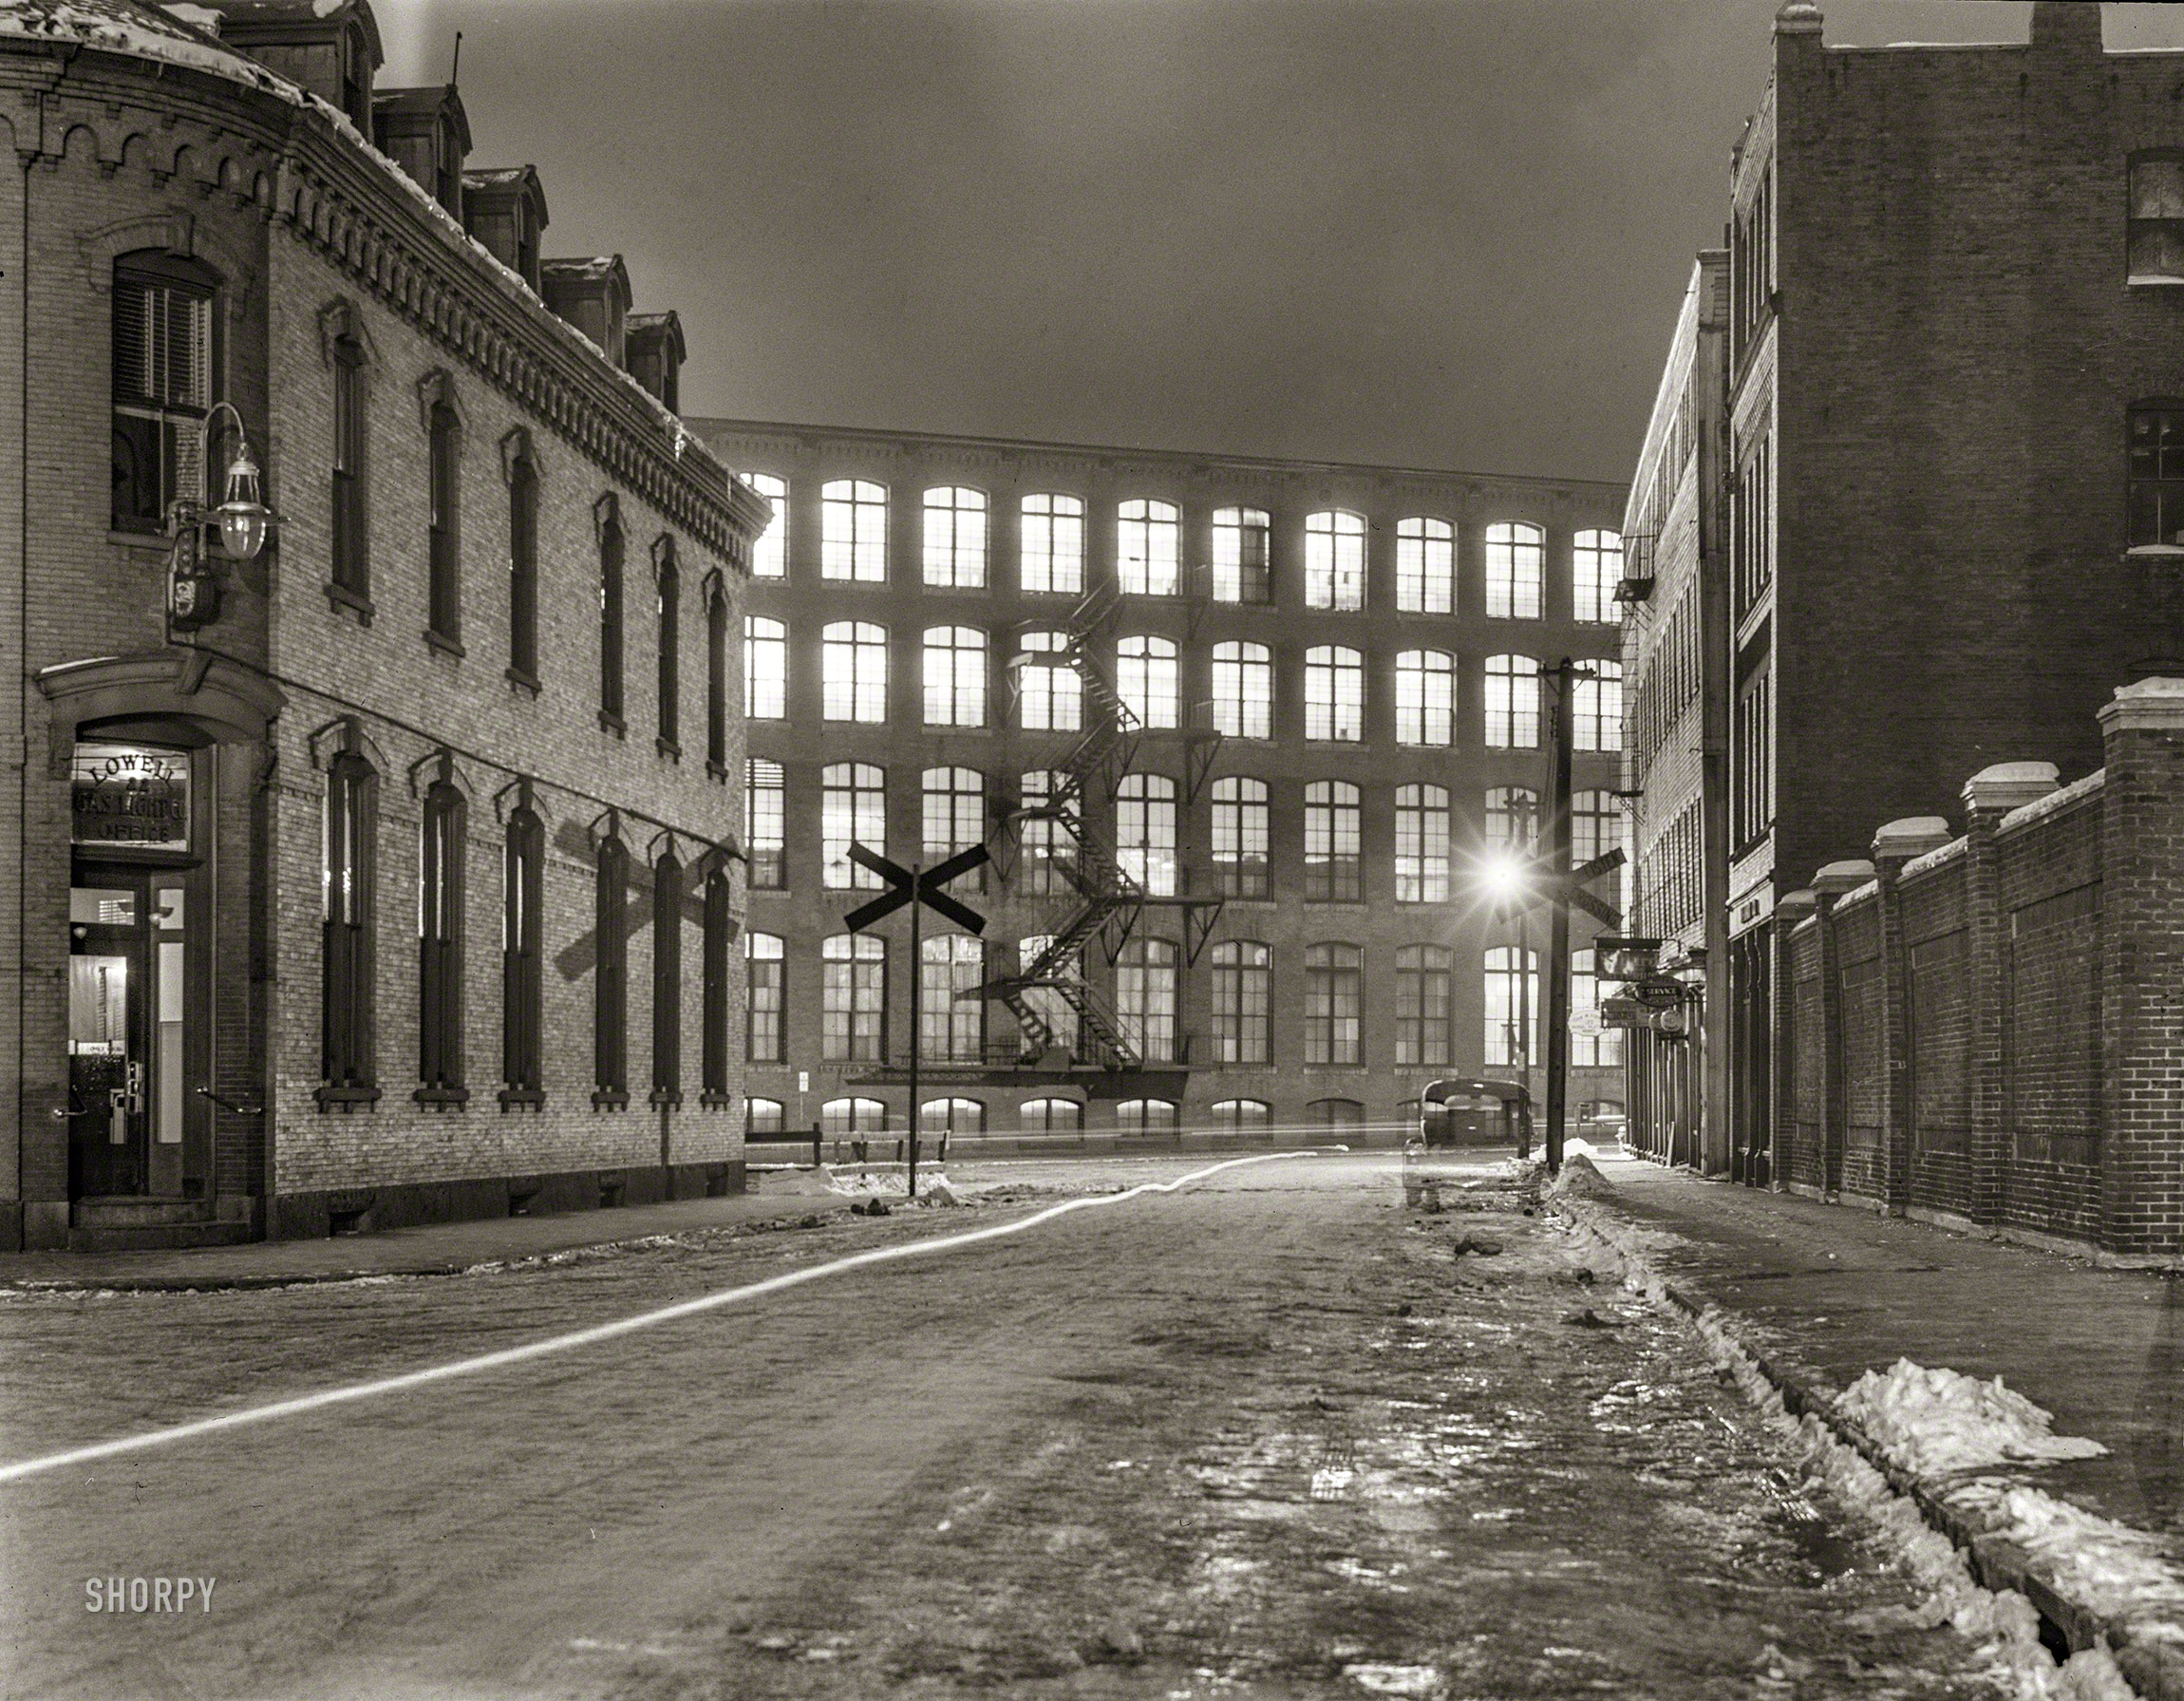 January 1941. "Textile mill working all night in Lowell, Massachusetts." Acetate negative by Jack Delano for the Farm Security Administration. View full size.